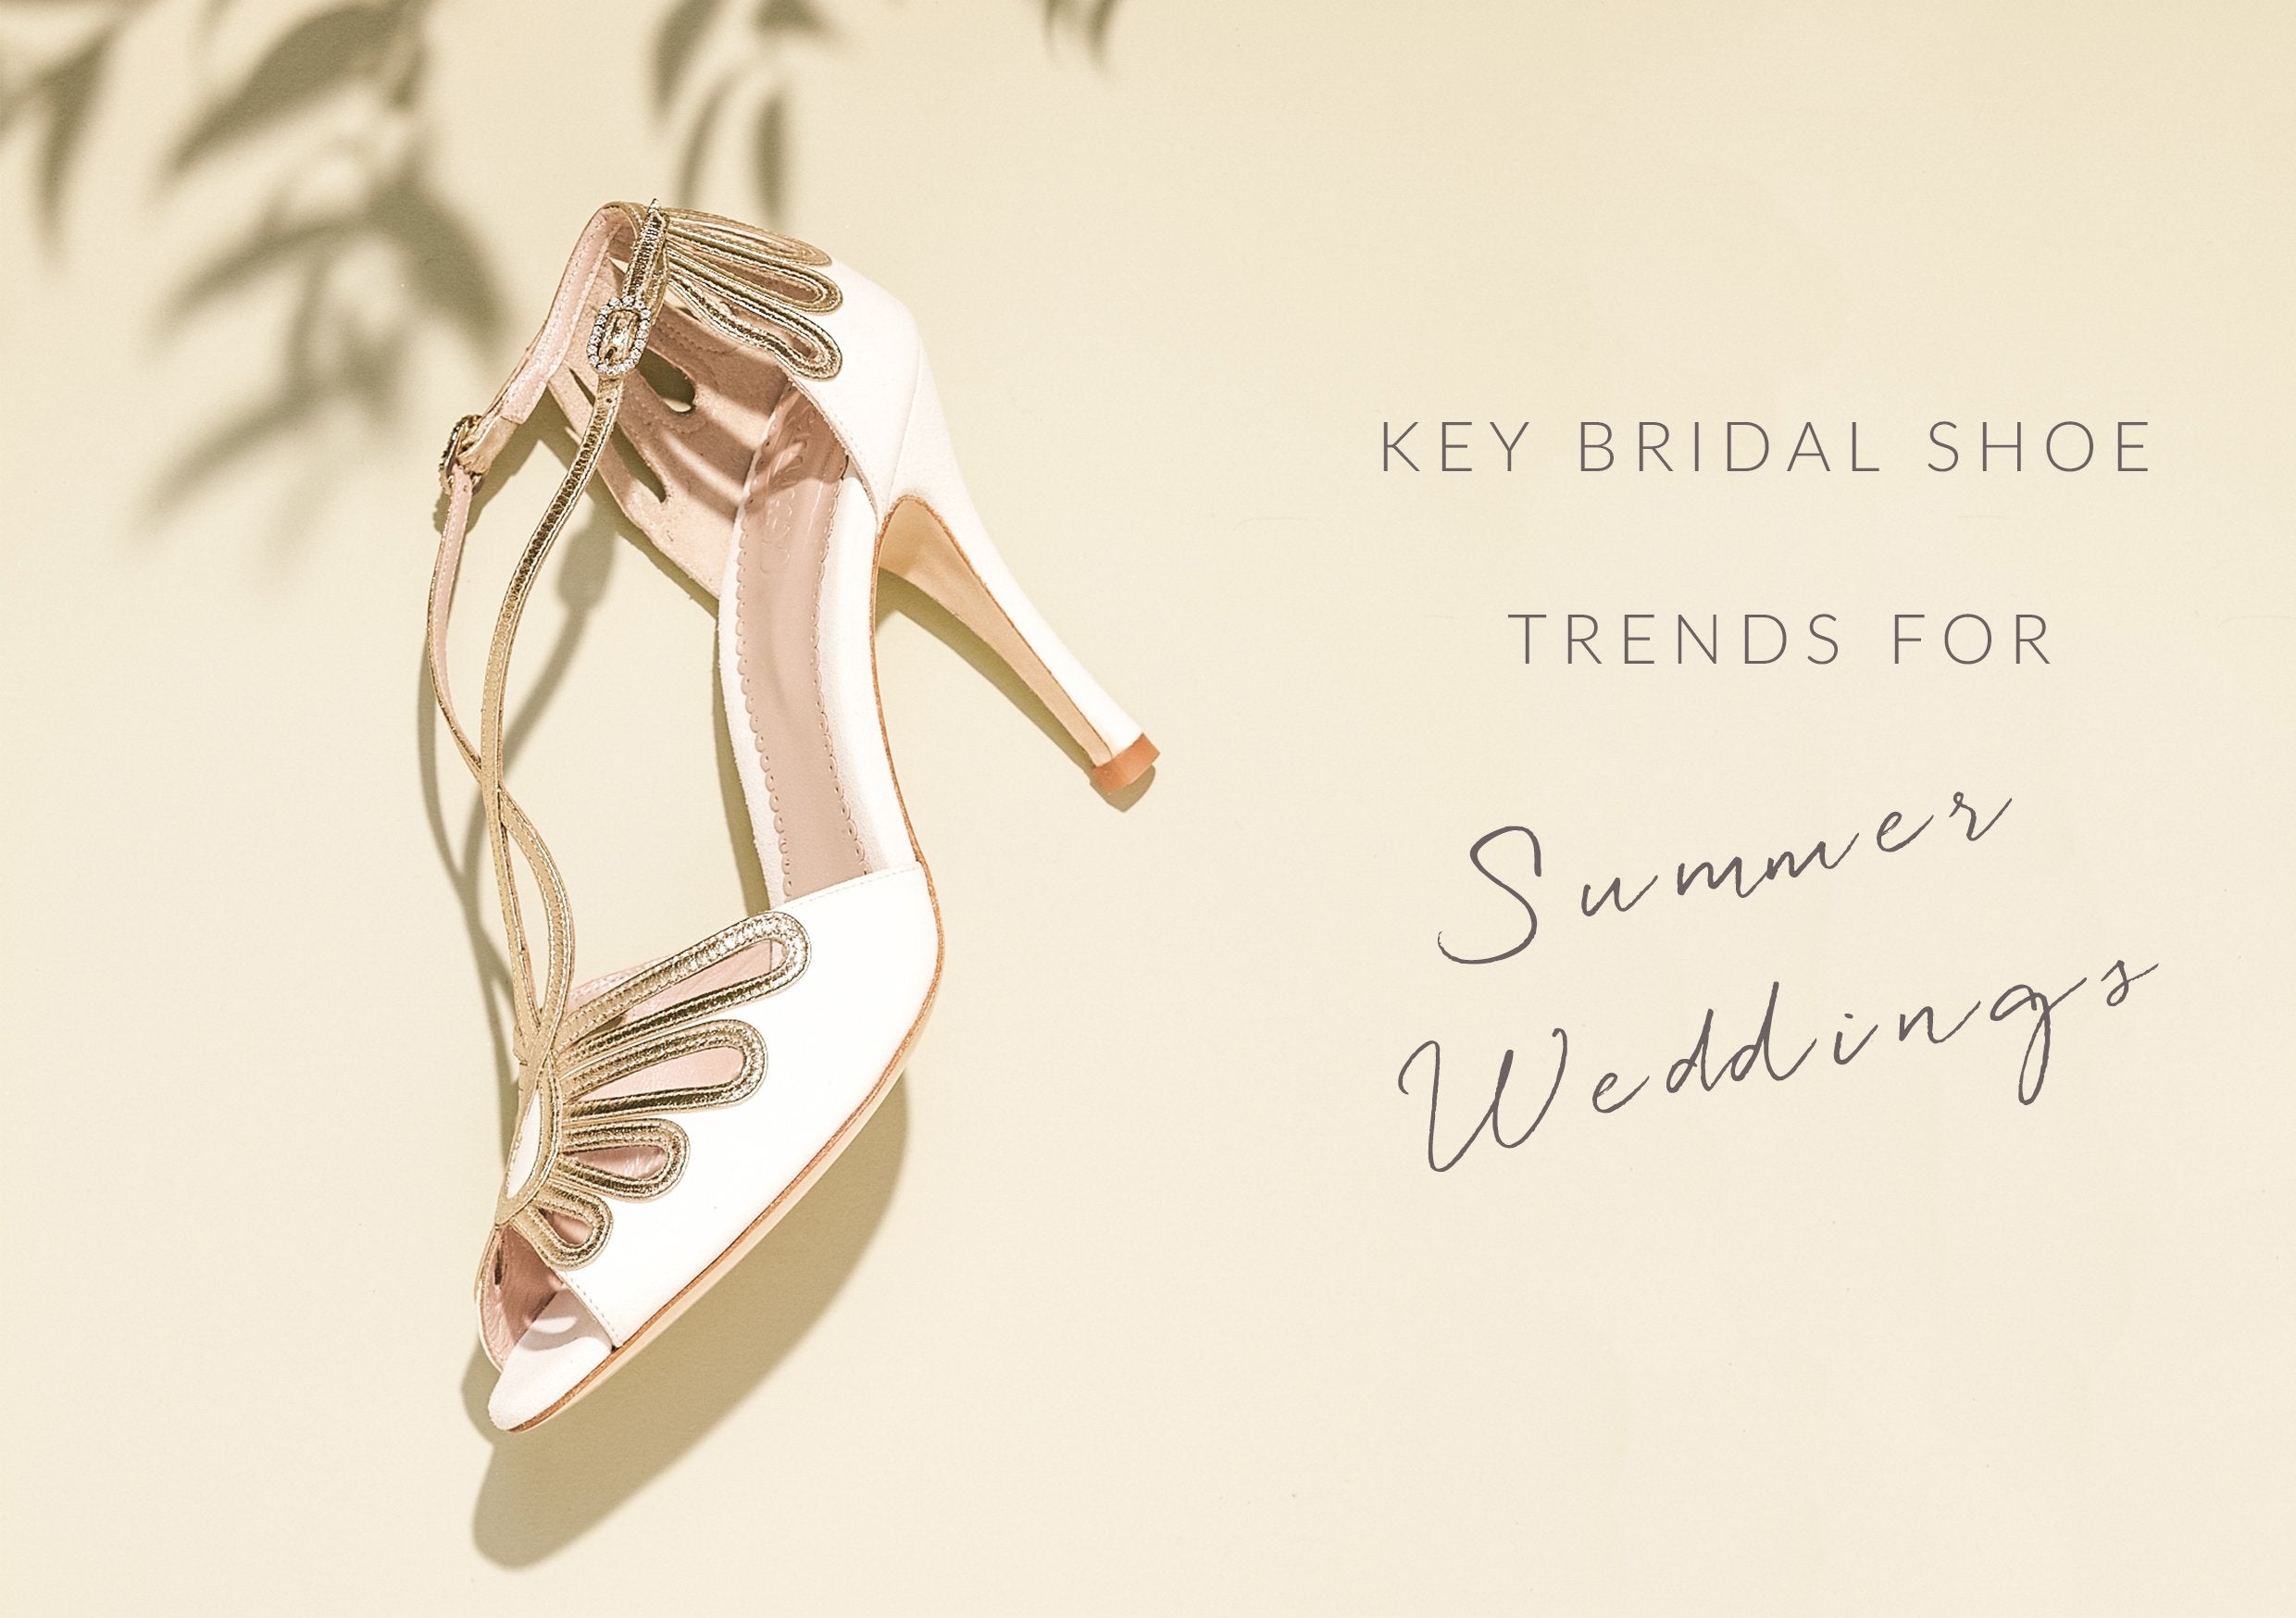 Key Bridal Shoe Trends for Summer Weddings article image